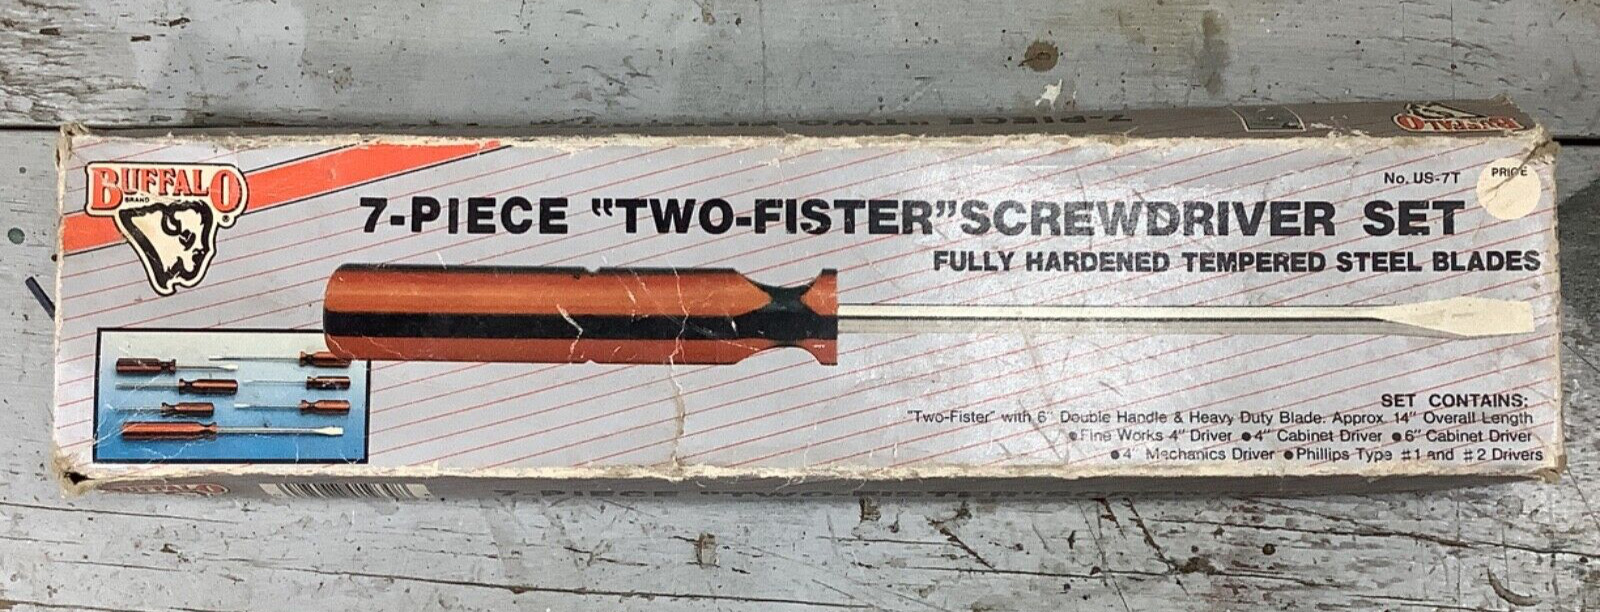 Vintage Buffalo 7-Piece Two Fister Screwdriver Set No. US-7T Used Condition